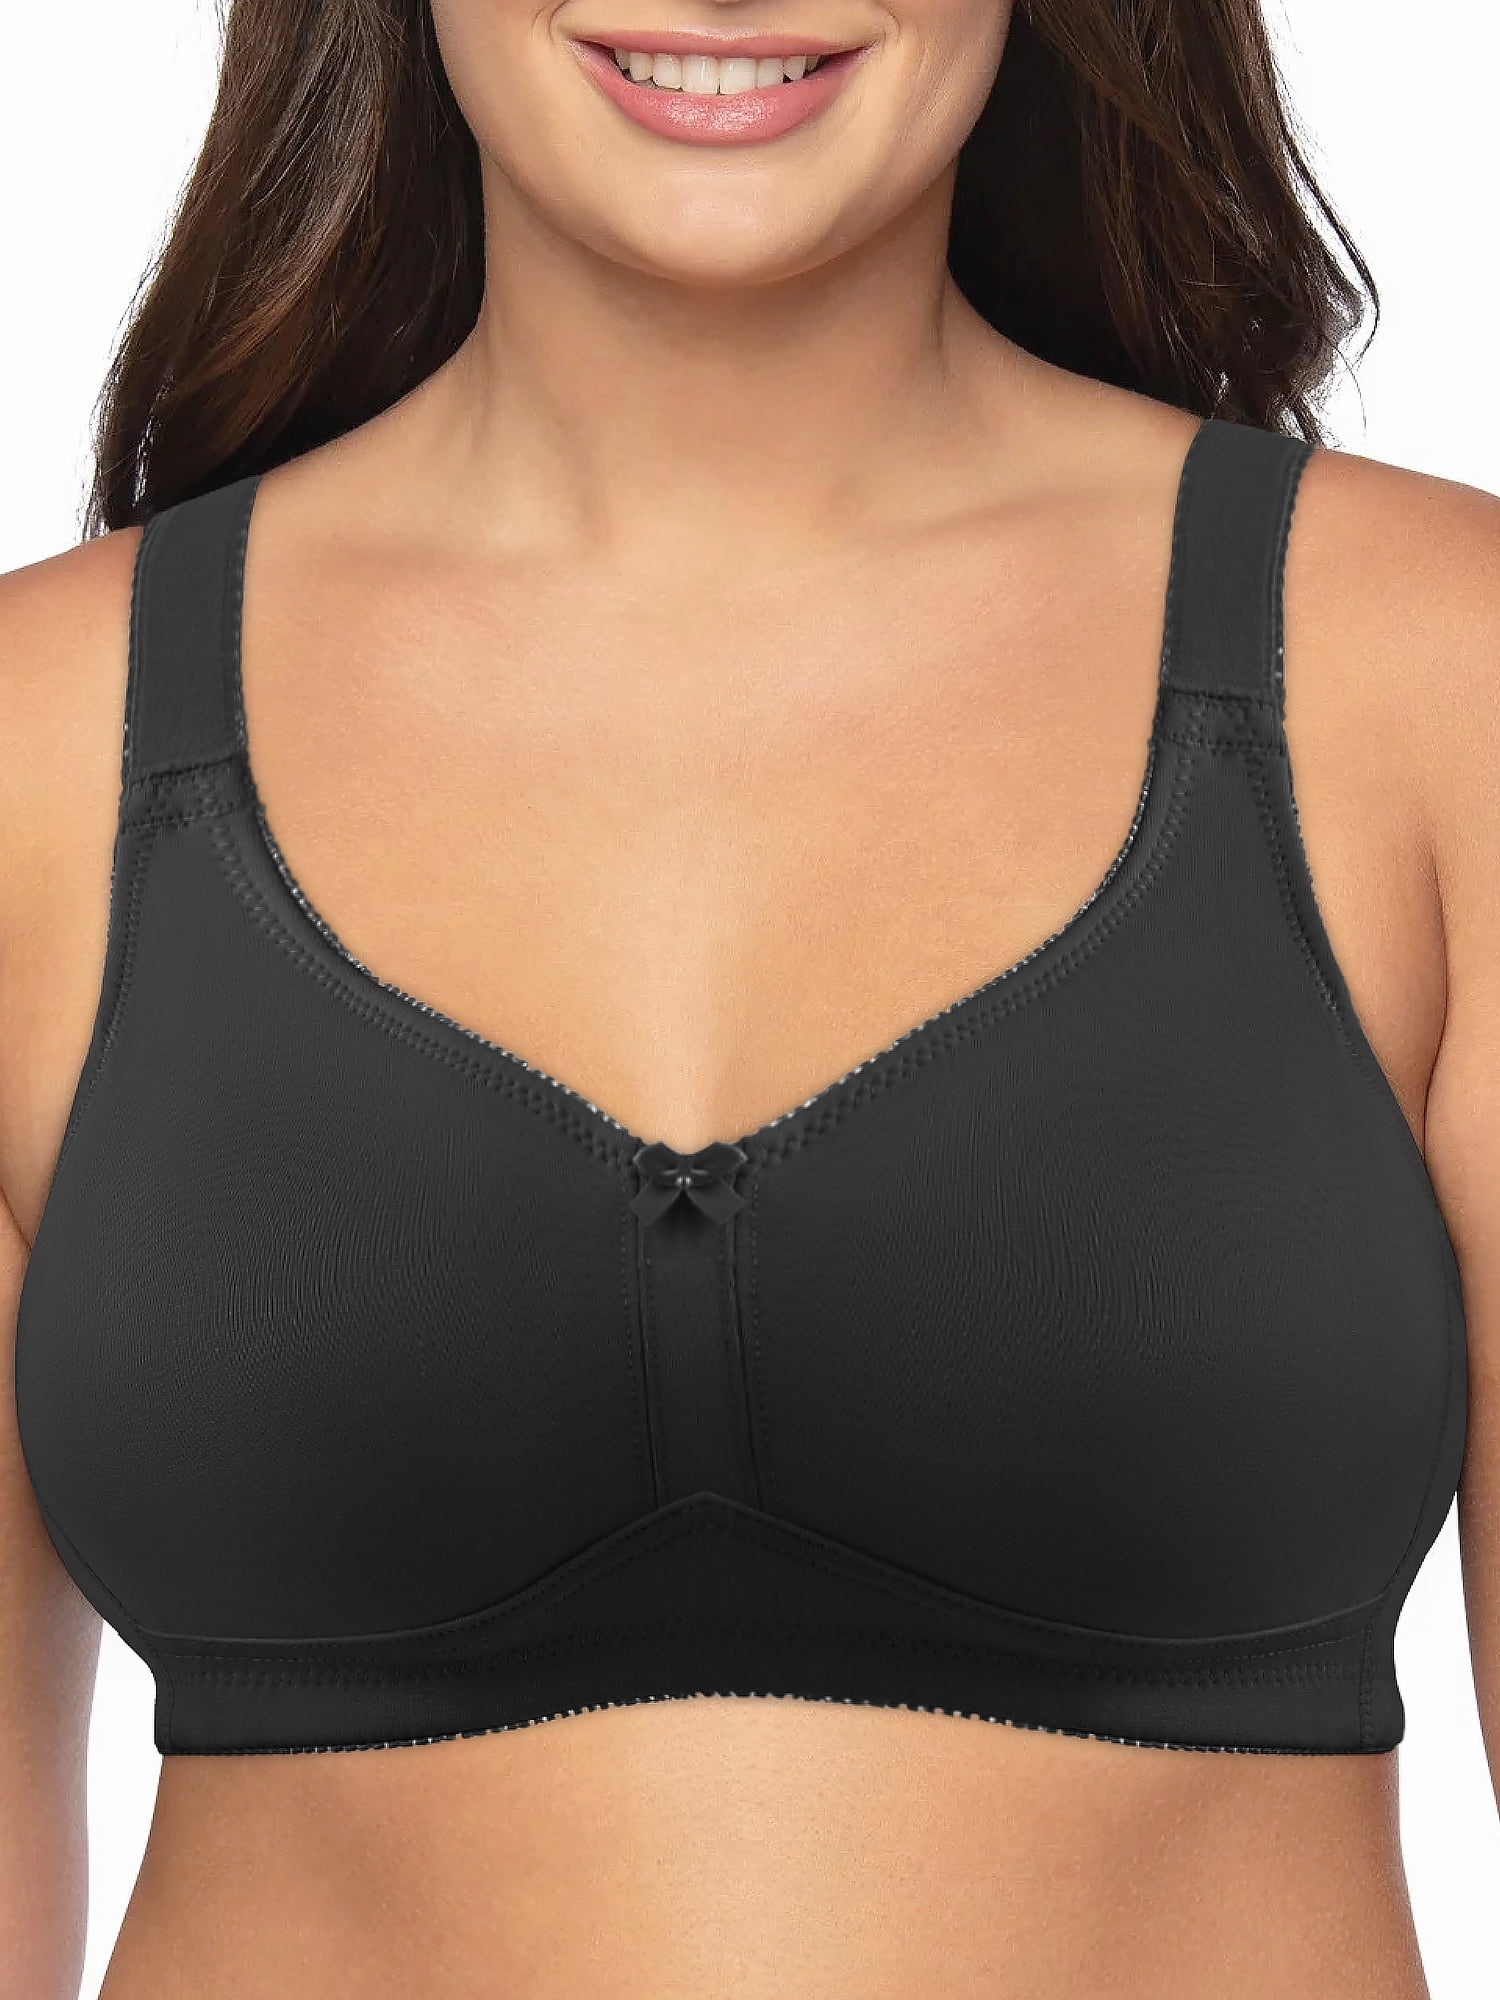 AILIVIN Wireless Bras for Women Full Figure Minimizer Women's Lace Bra  WireFree Lifting Up Full Support Lightly Lined Cup Full Coverage No Back  Fat Comfy No Wire Womens Bras Black 34DDD 34